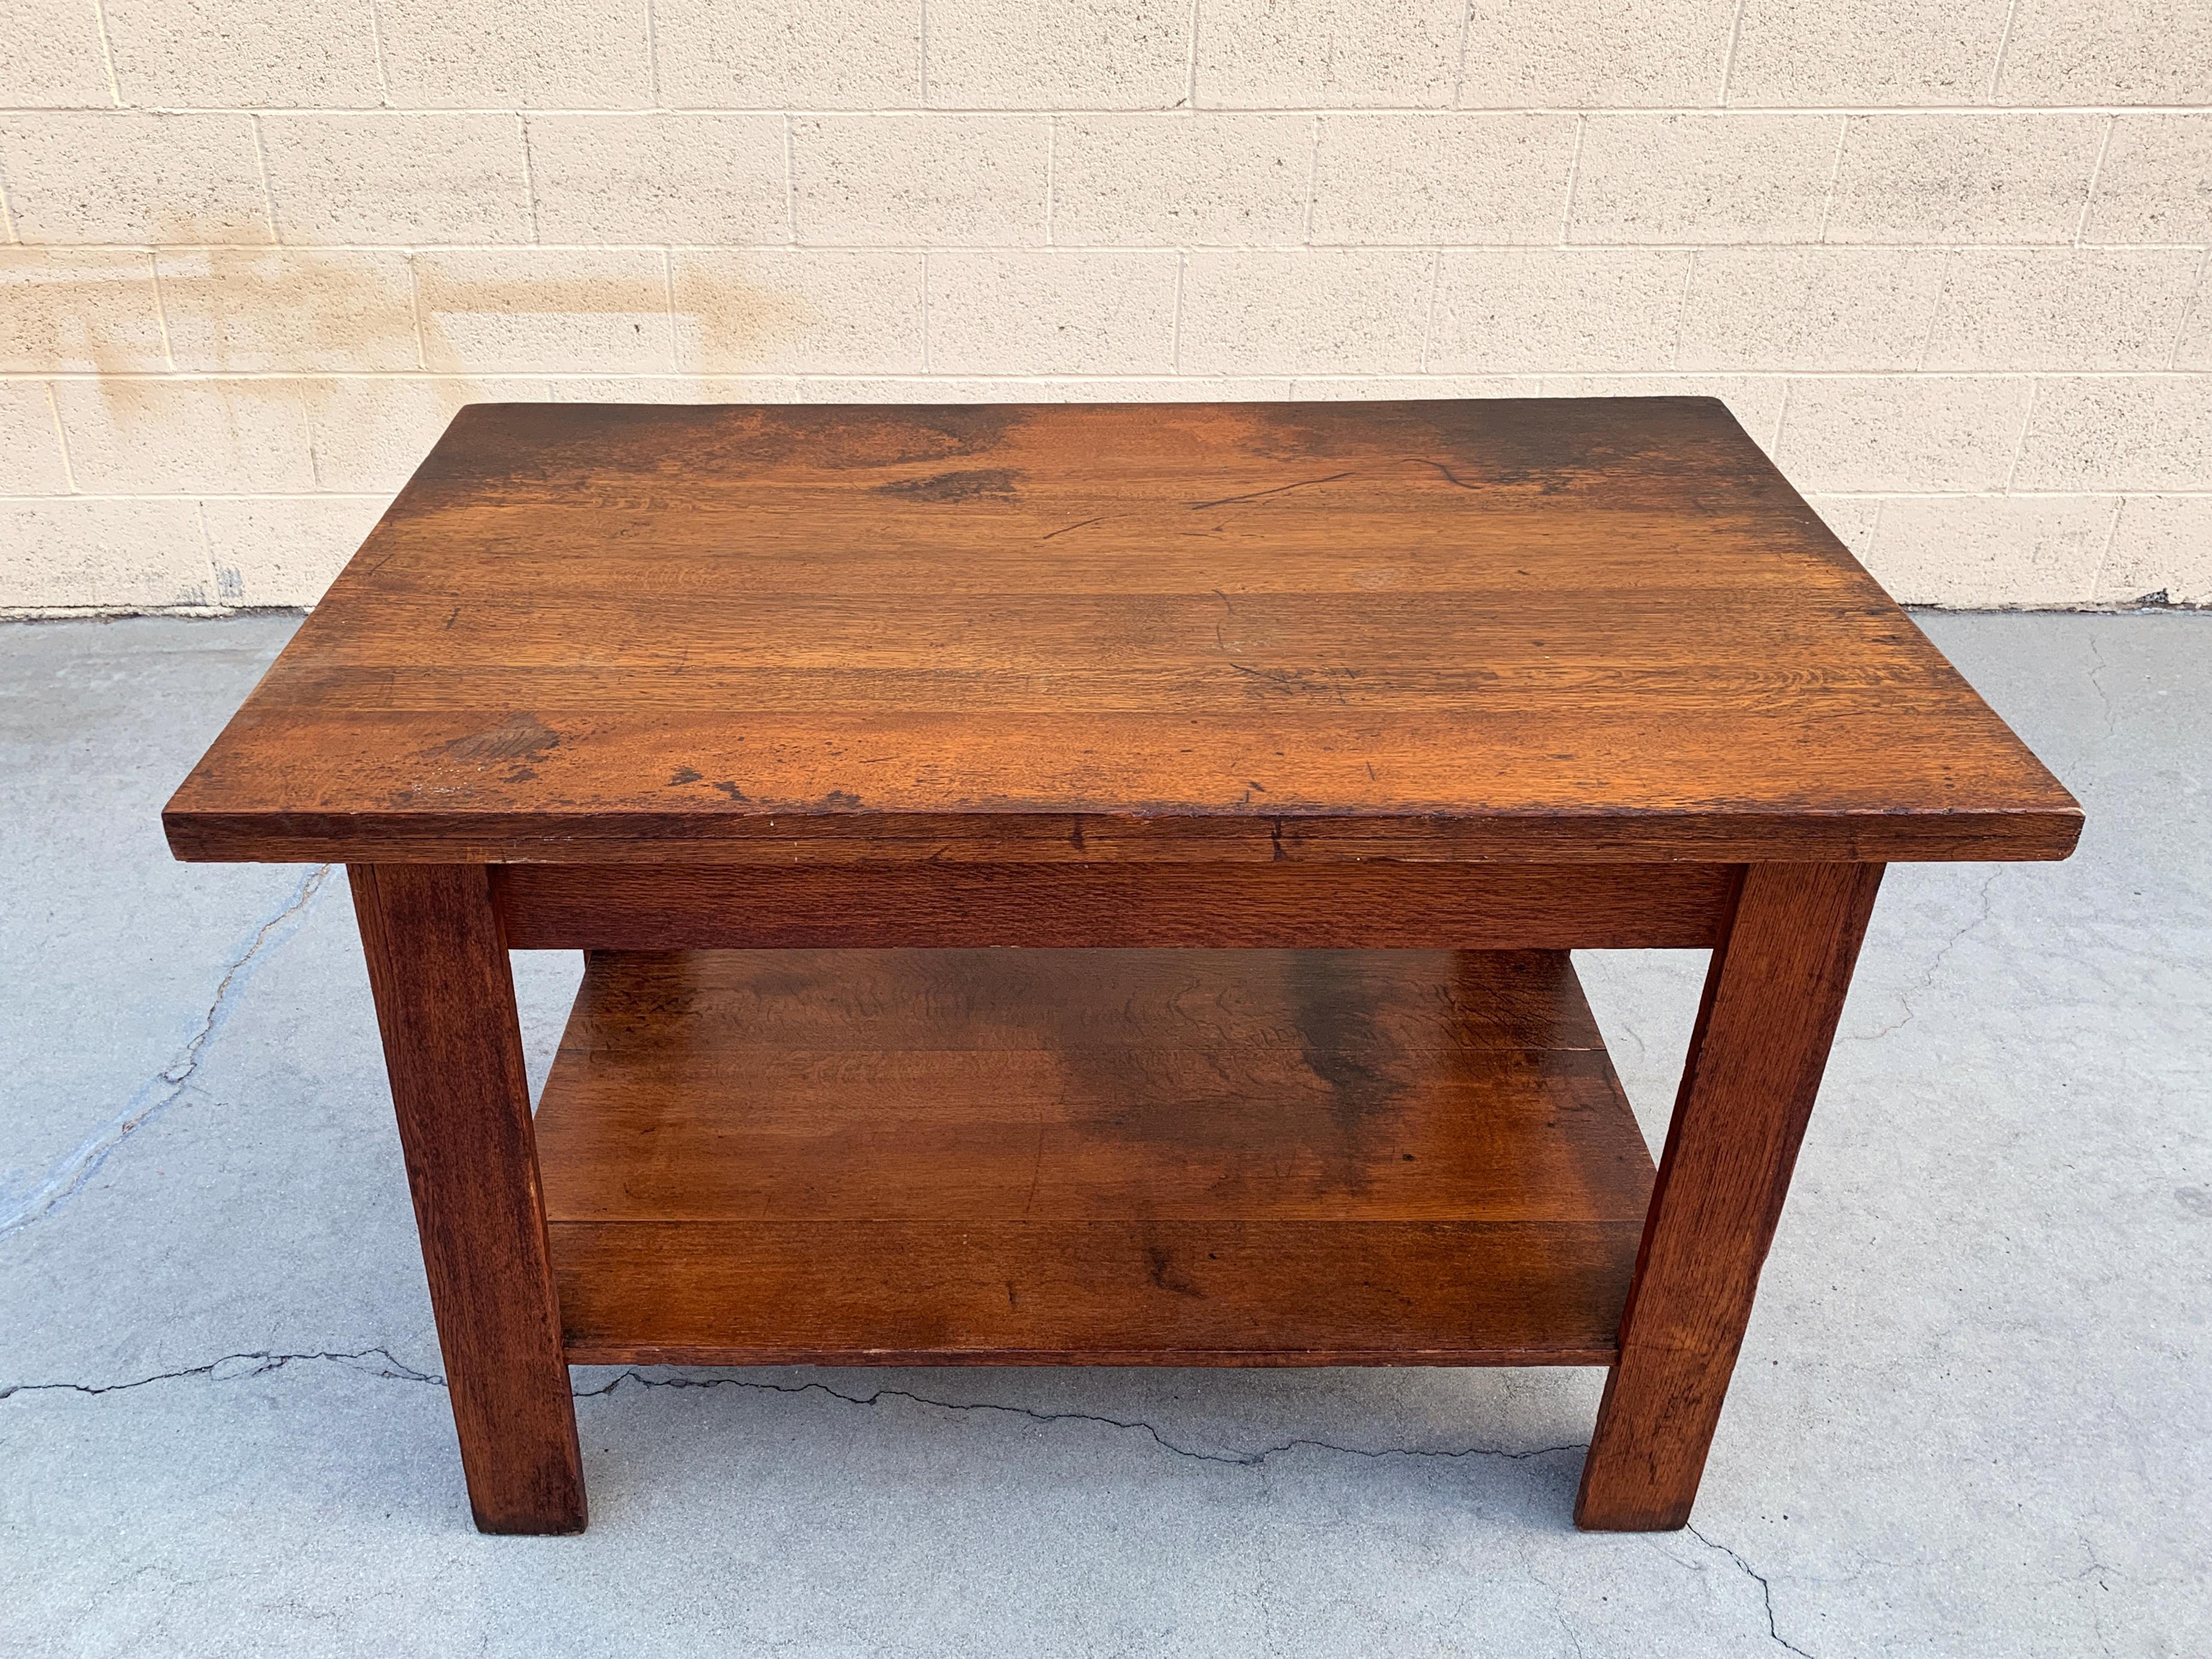 Beautifully made antique oak library table, circa 1920s American craftsman period. Constructed of solid oak with quarter sewn oak plank shelf and 2